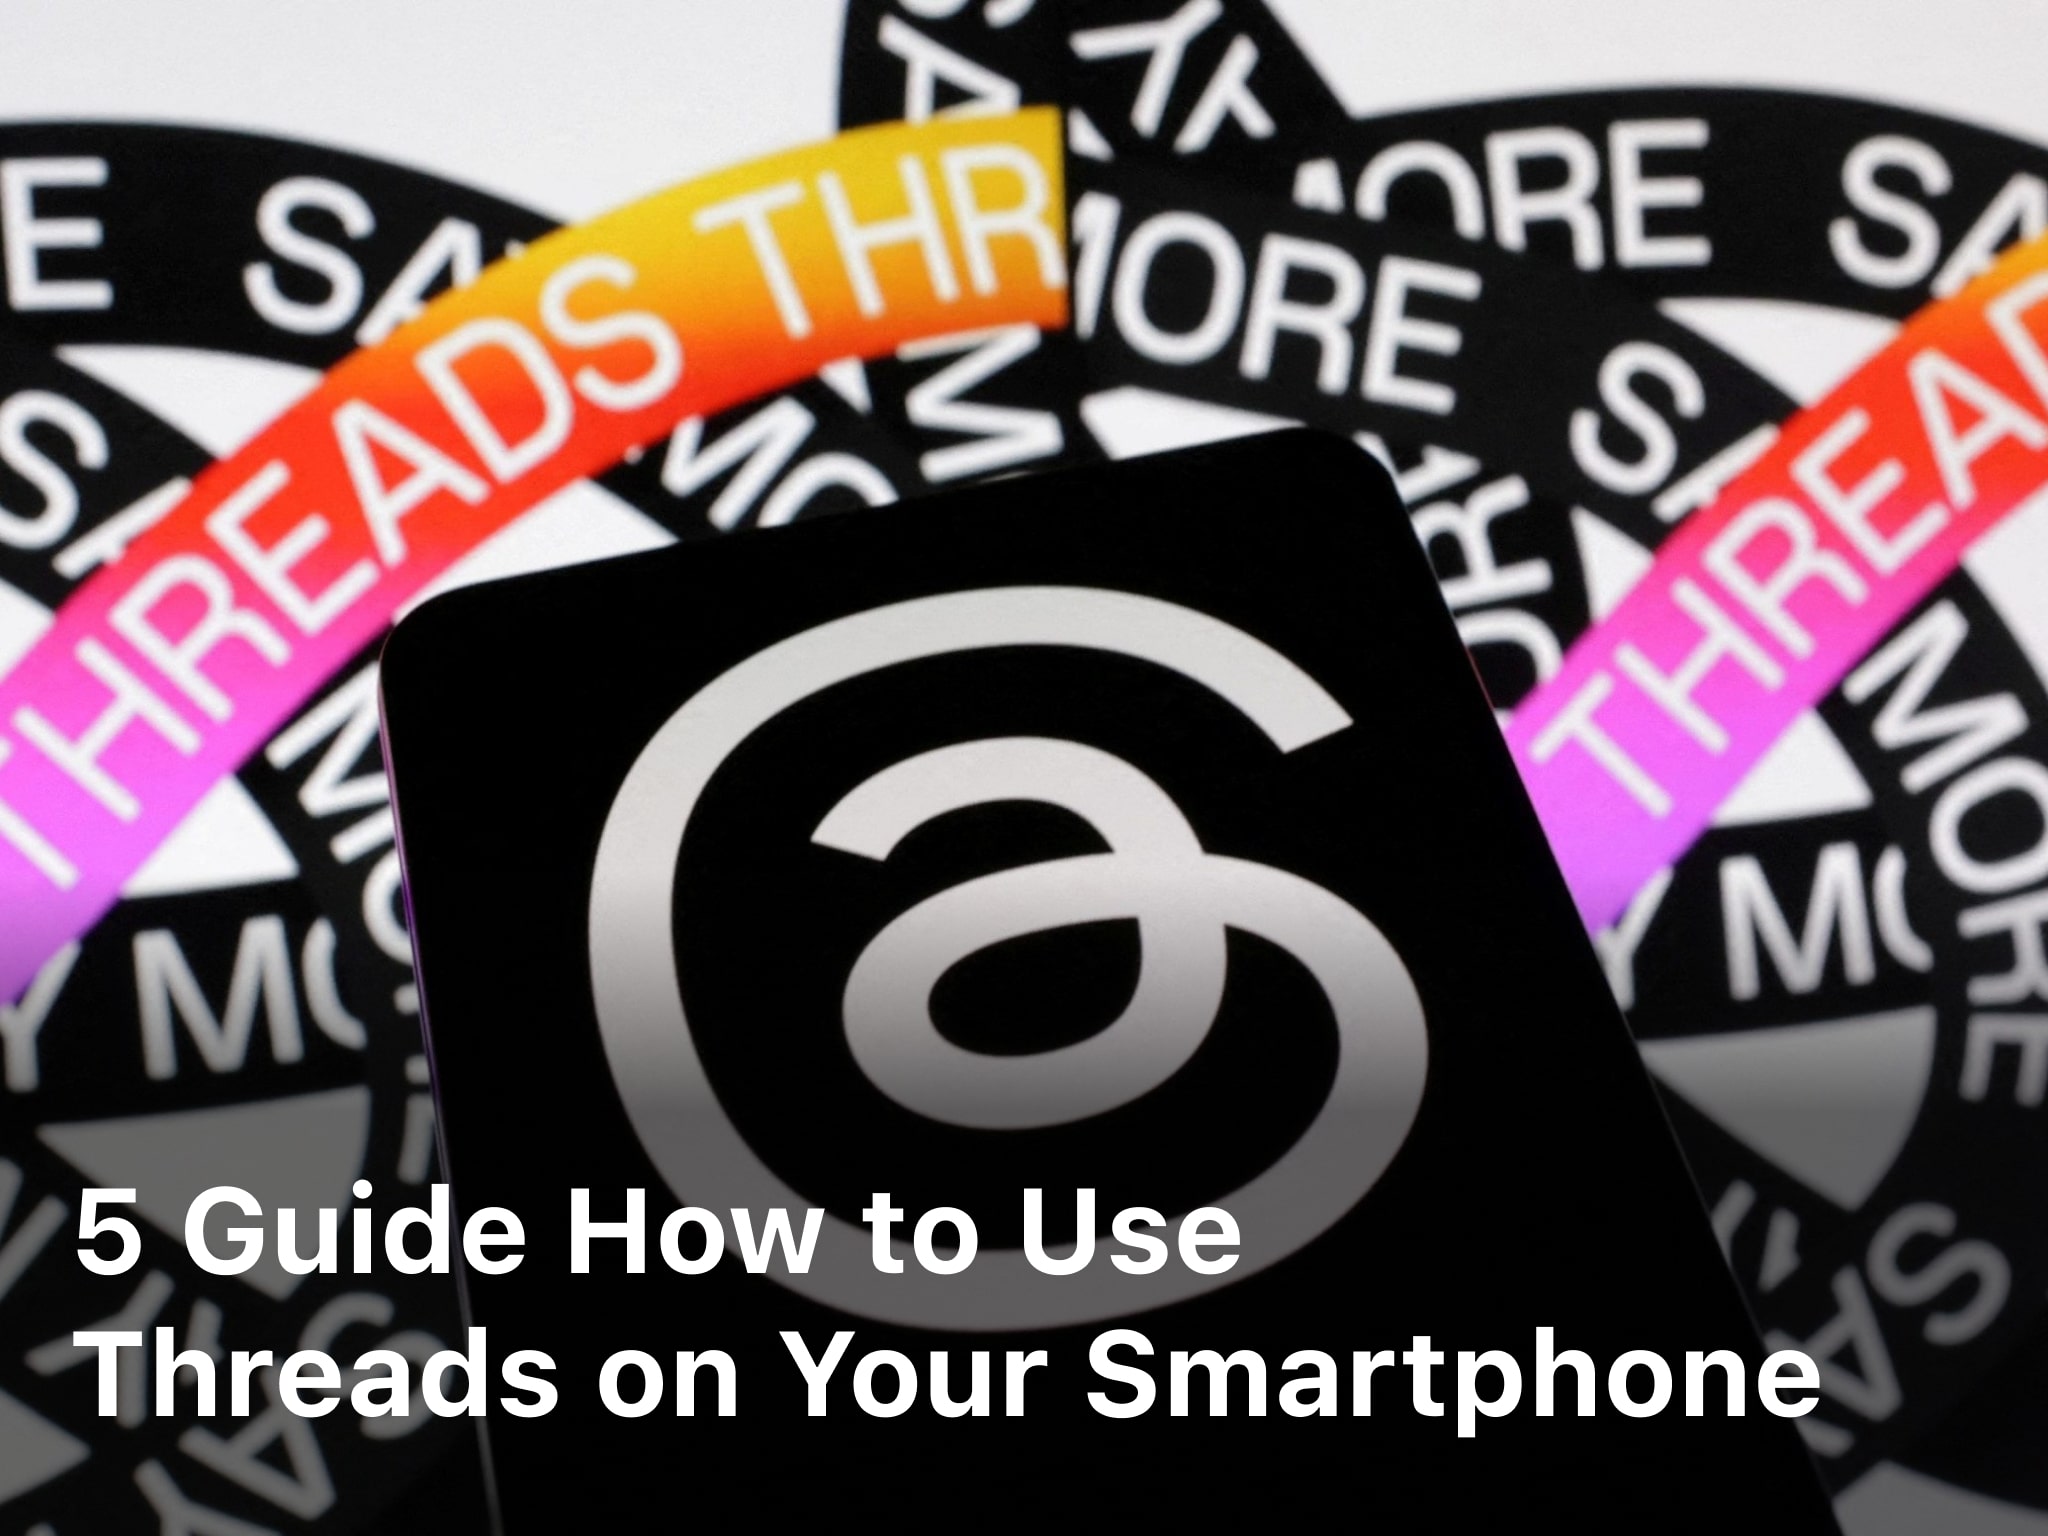 5 Guide How to Use Threads on Your Smartphone